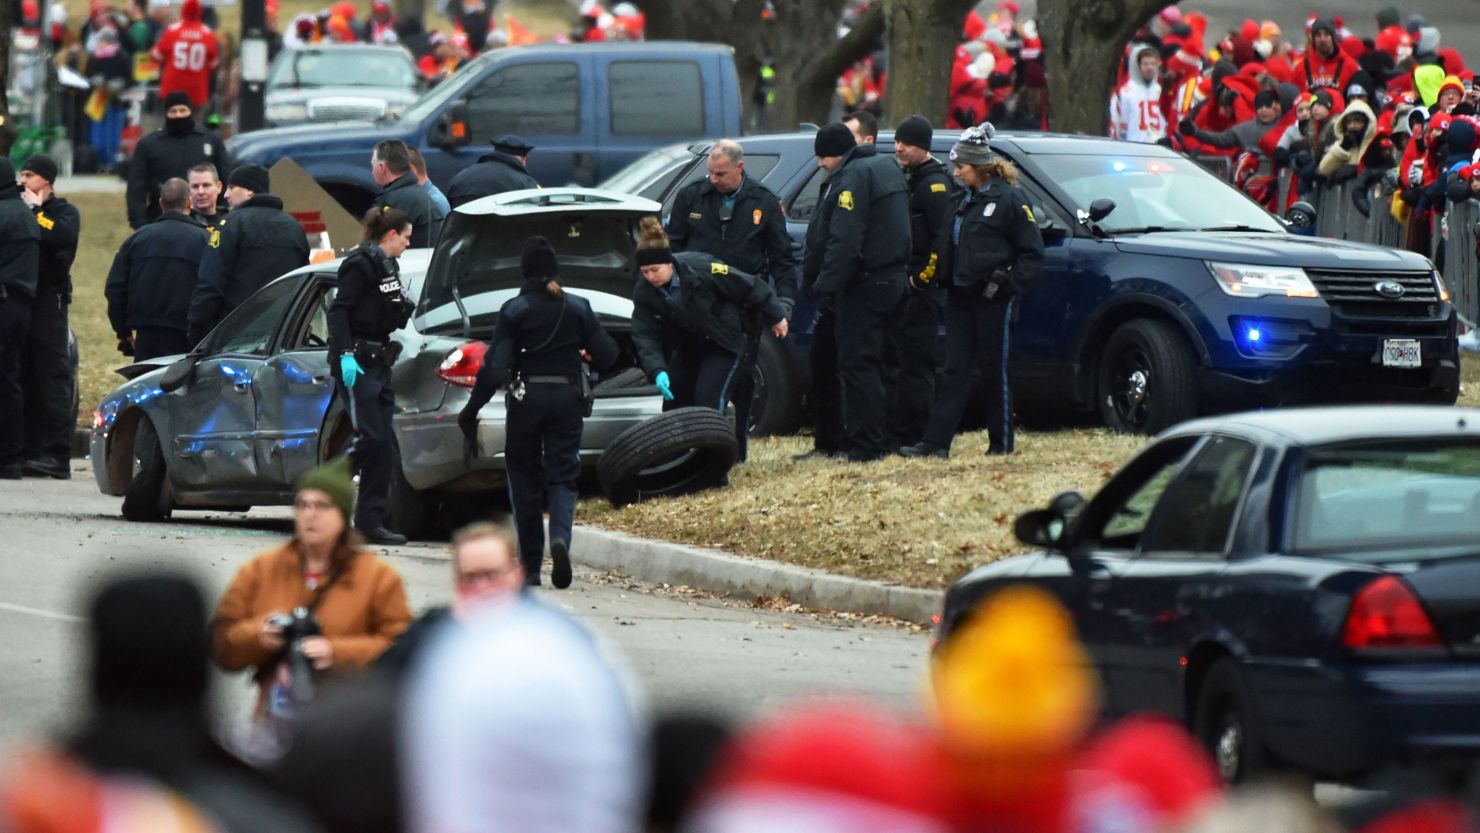 Police search a car after forcibly stopping it on the parade route for the Kansas City Chiefs in downtown Kansas City on Wednesday morning.